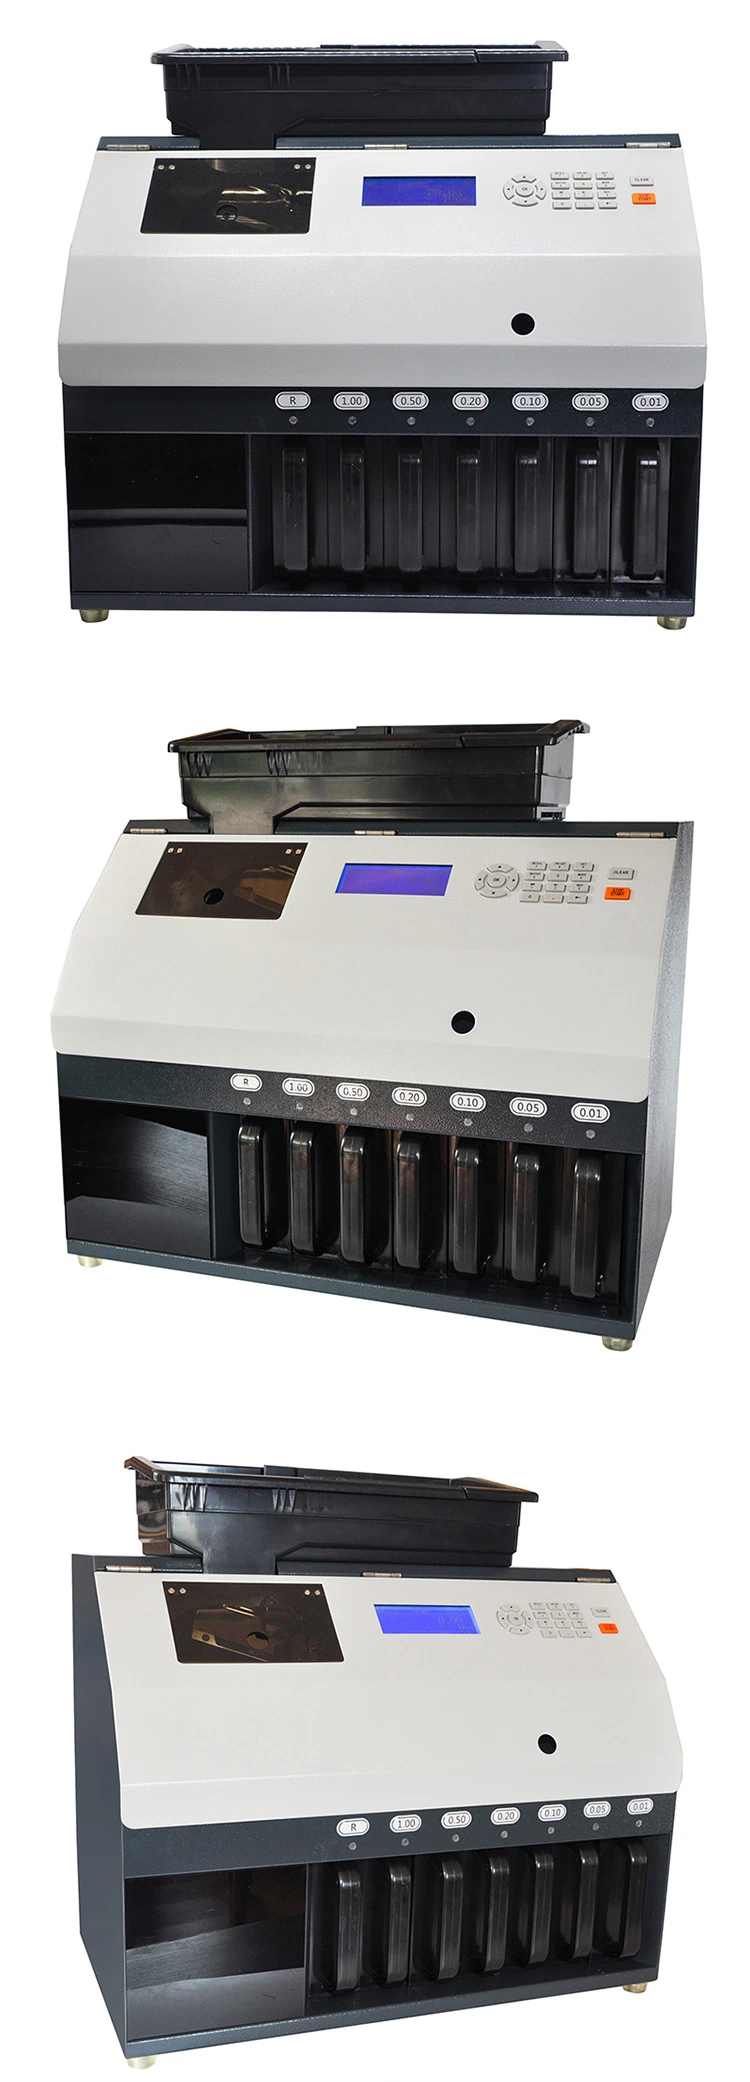 Wt-70 &#160; Wholesale Factory Made Money Coin Sorter Counter, Professional Coin Counter and Sorter